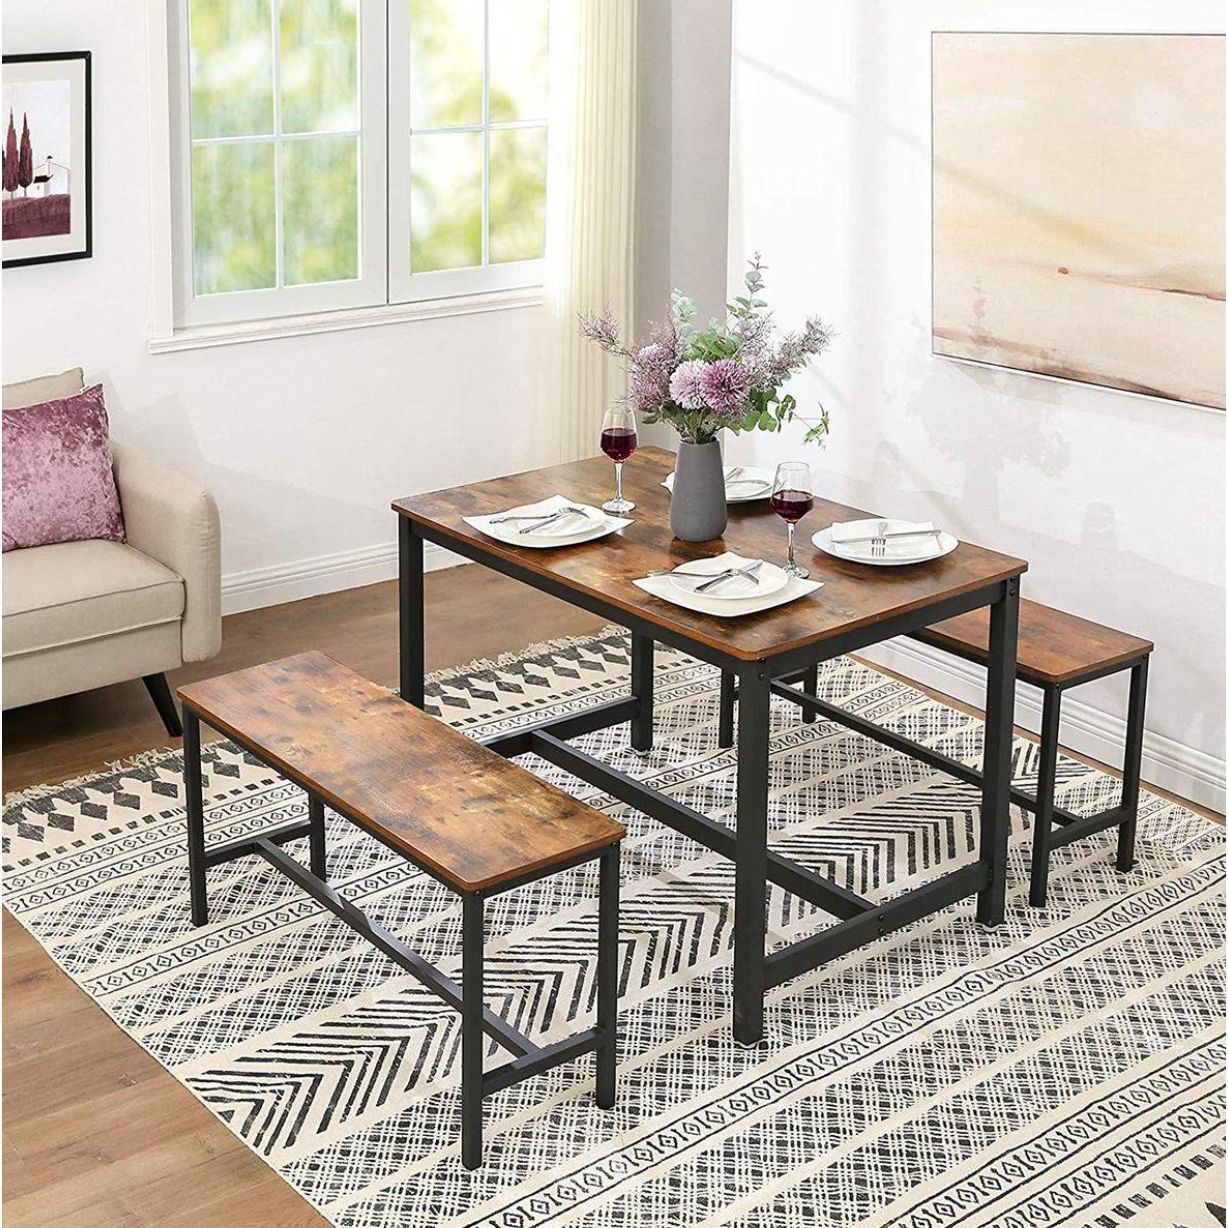 Nancy's Industrial Set of 2 Table Benches - Dining Room Bench - 108 x 32.5 x 50 cm - Benches